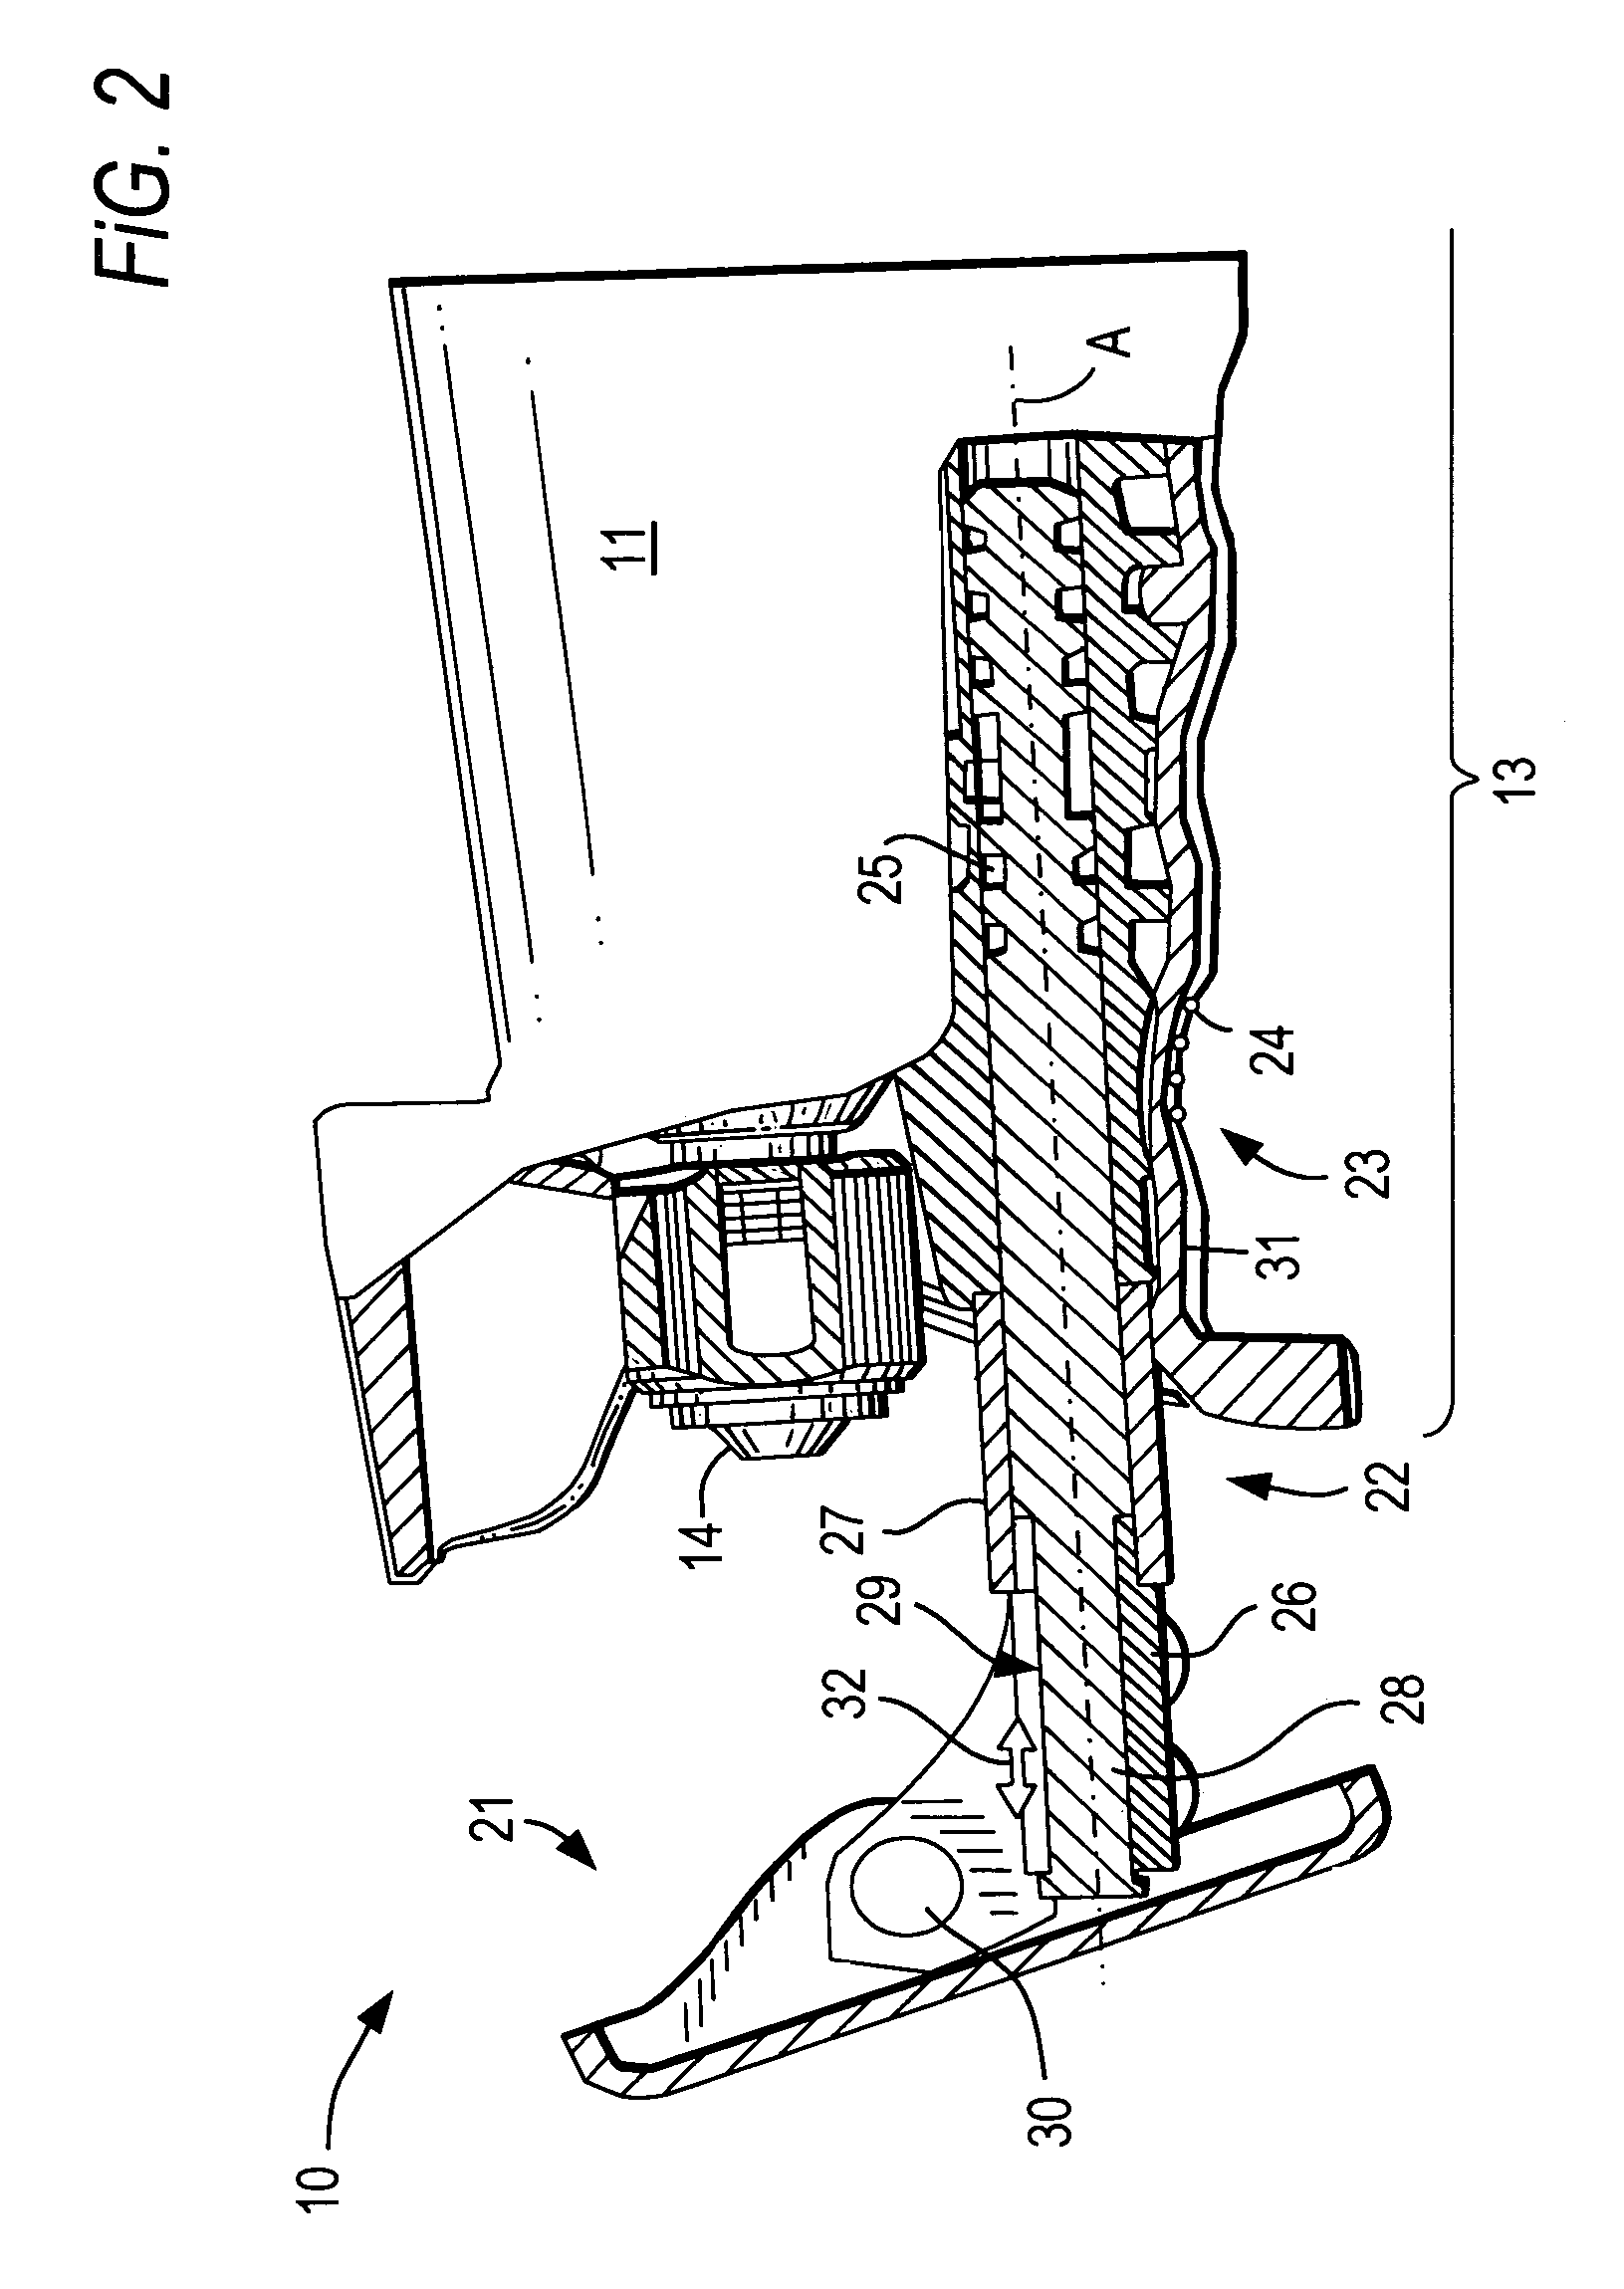 Motor-driven saber saw with guide device